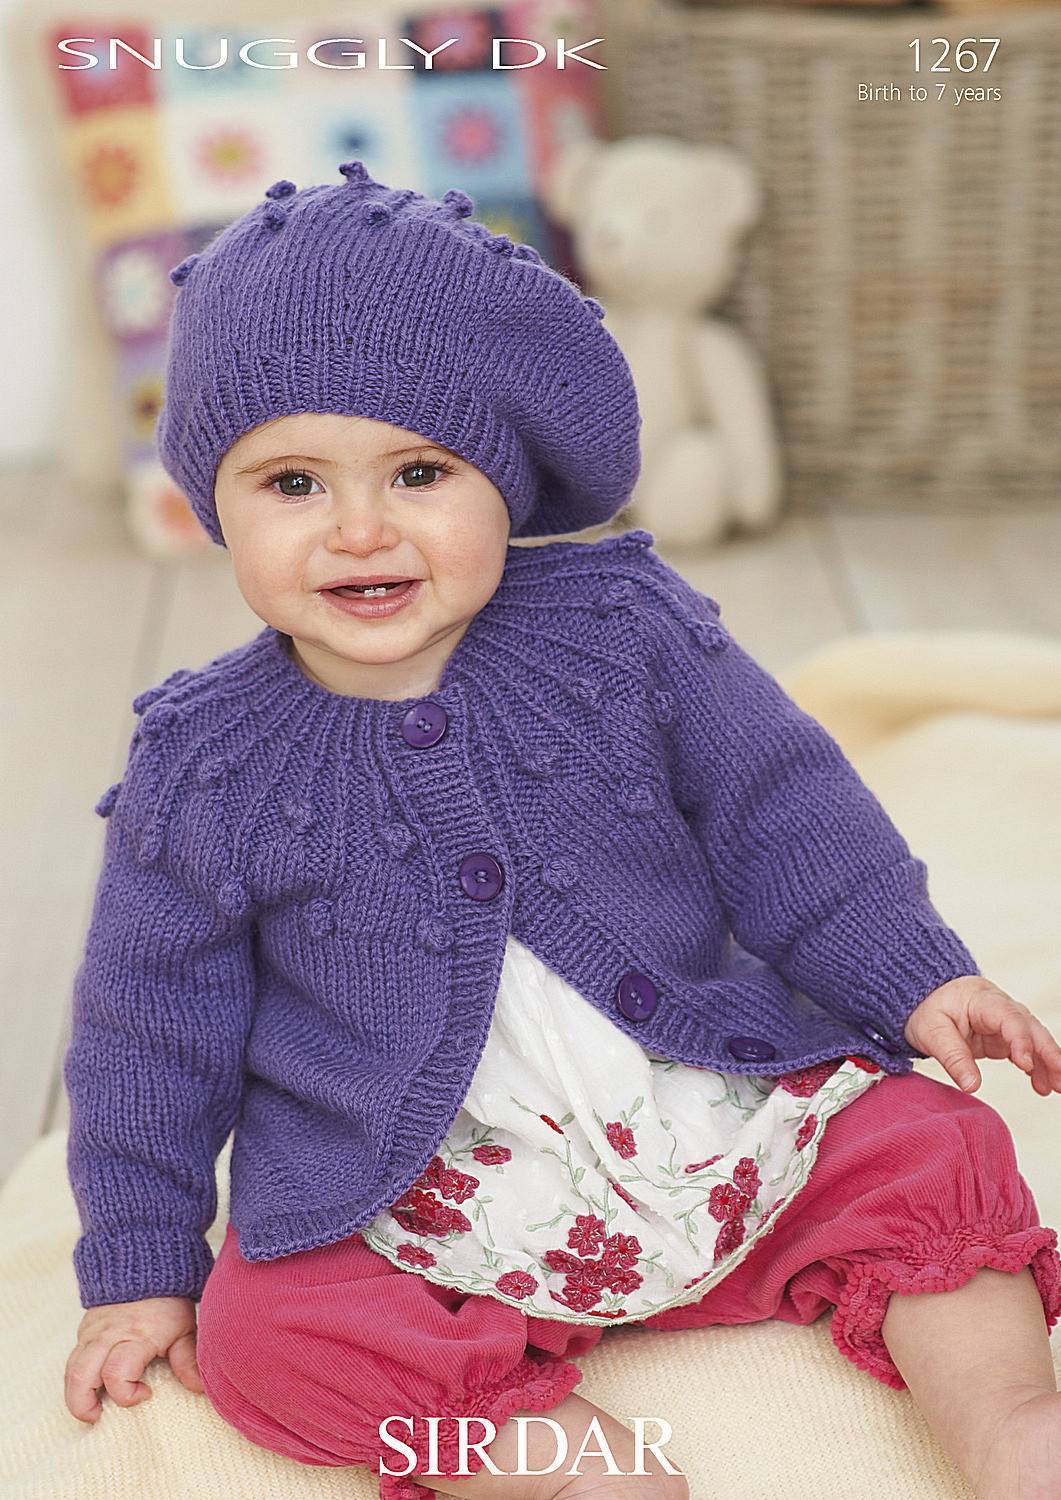 Cardigan and Beret in Sirdar Snuggly DK (1267) | The Knitting Network